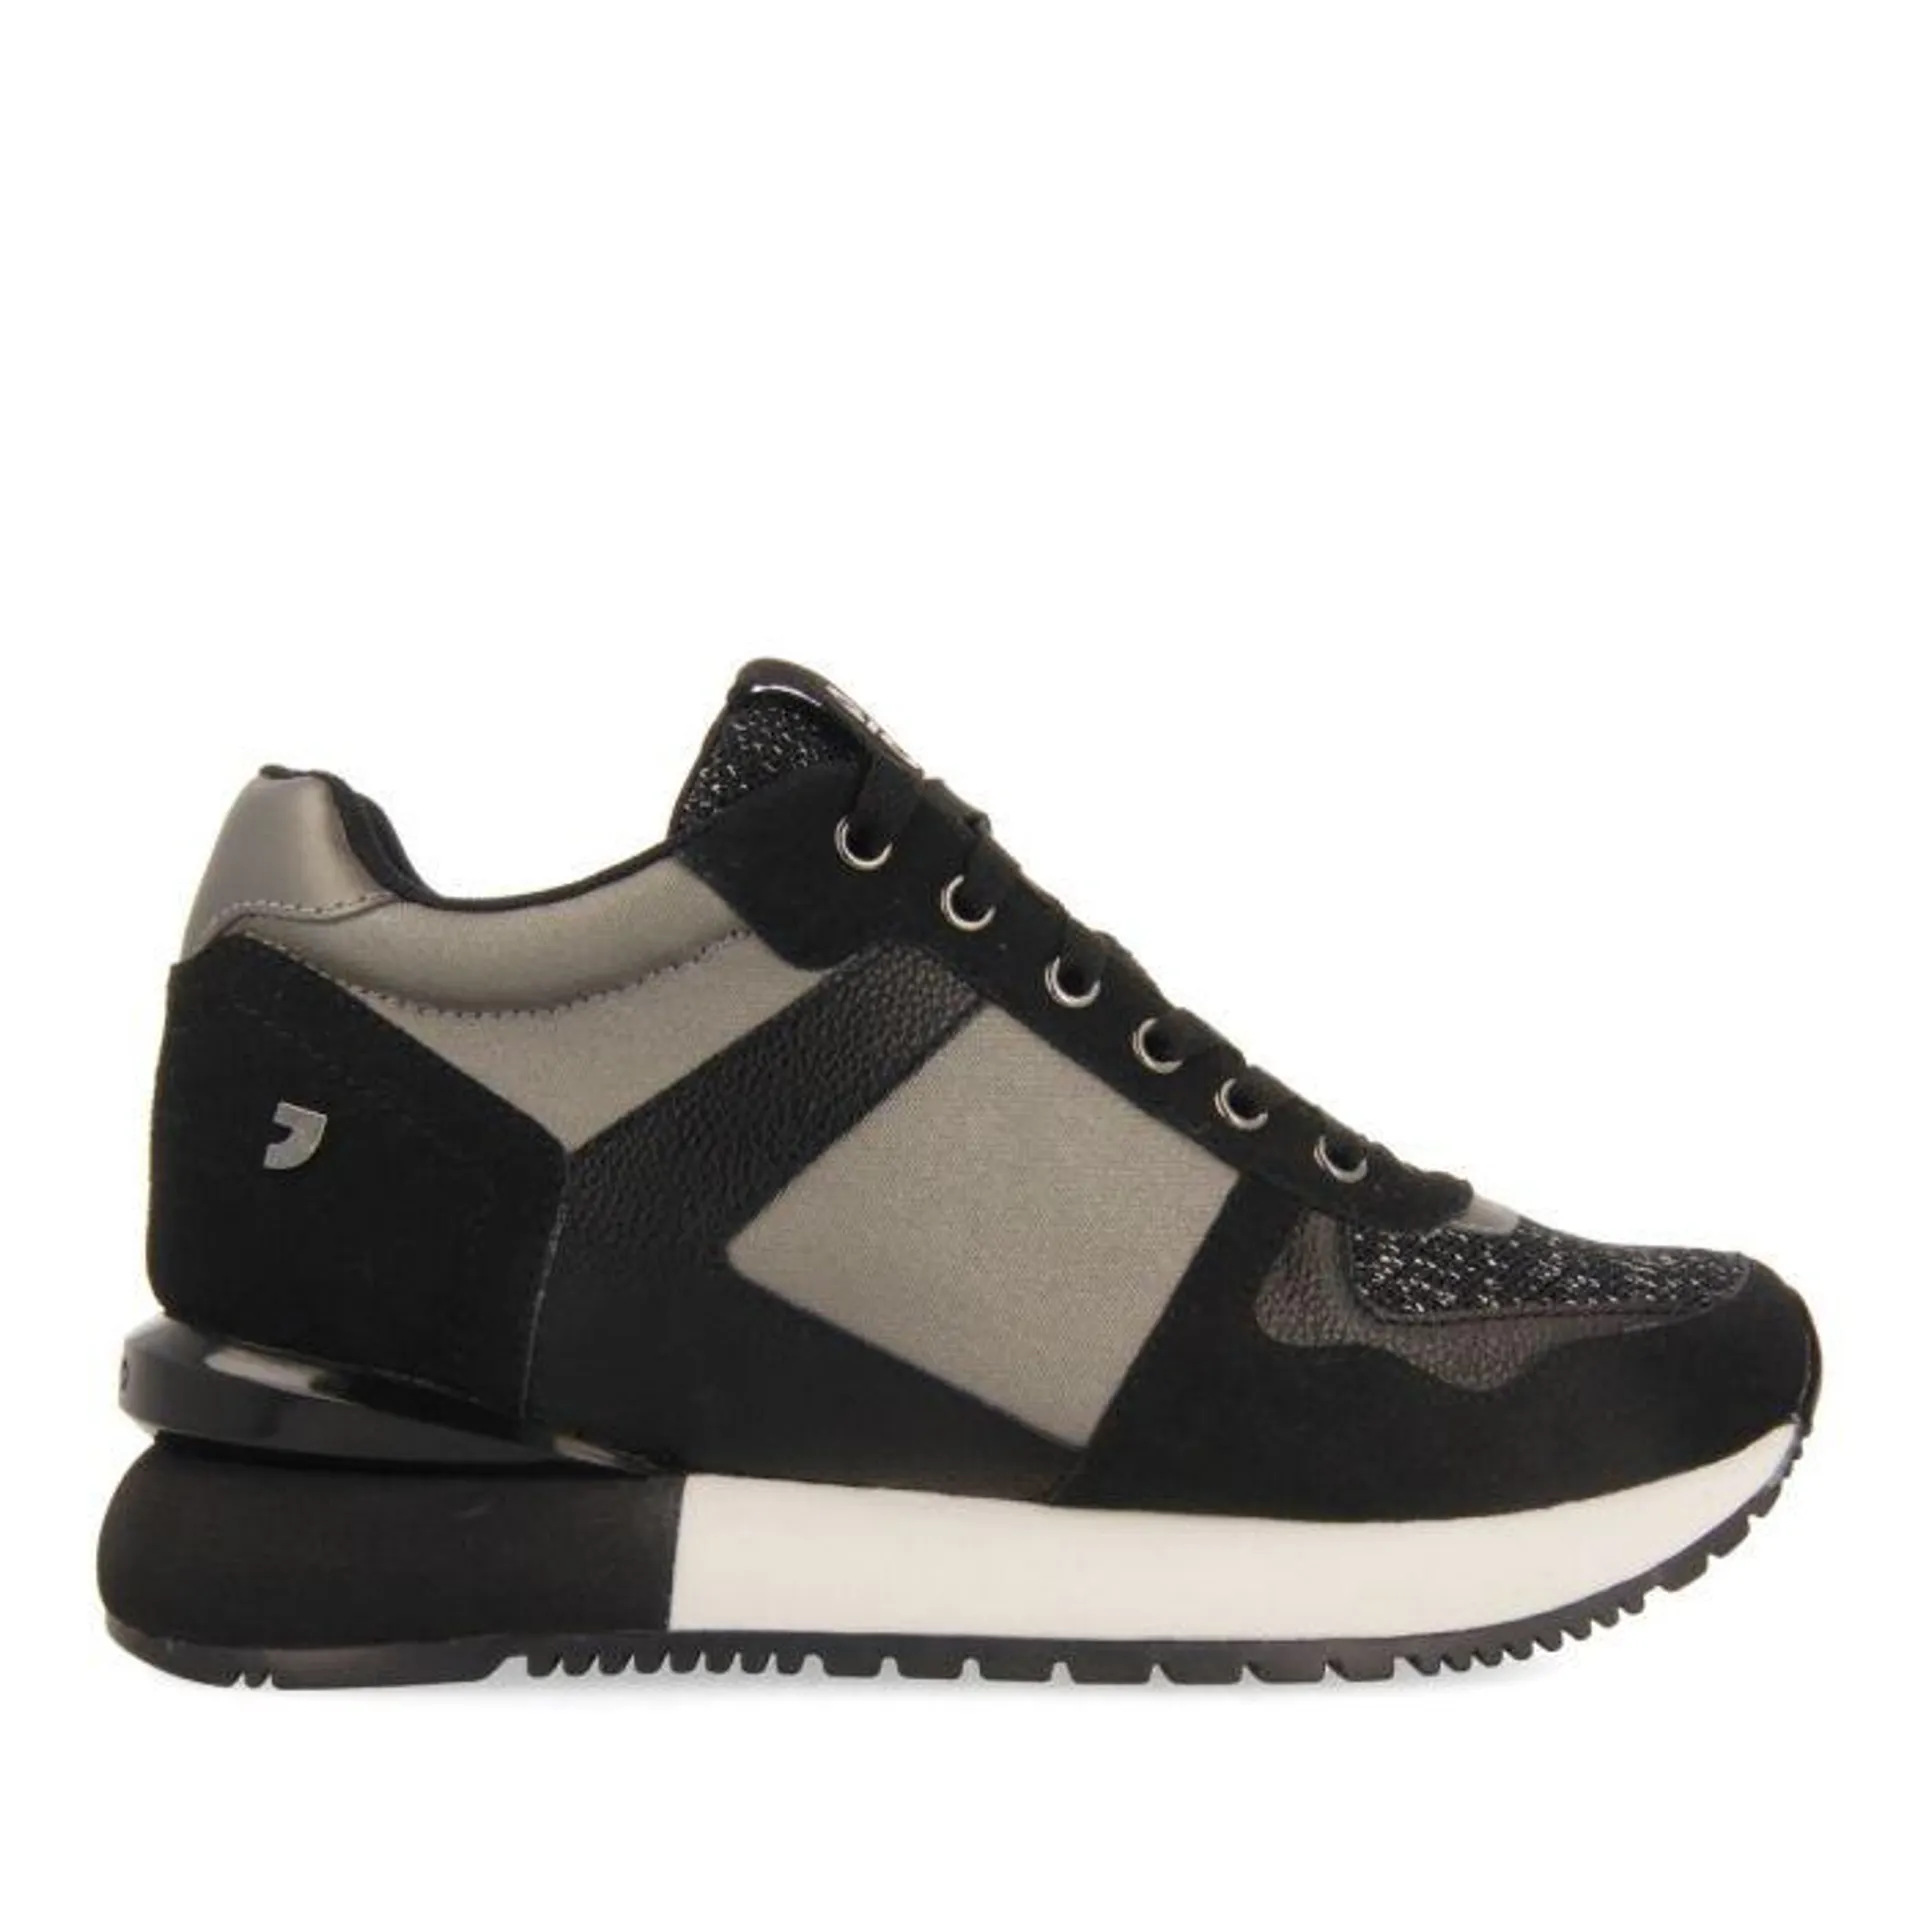 Girst women's dark silver monochrome sneakers with inner wedges